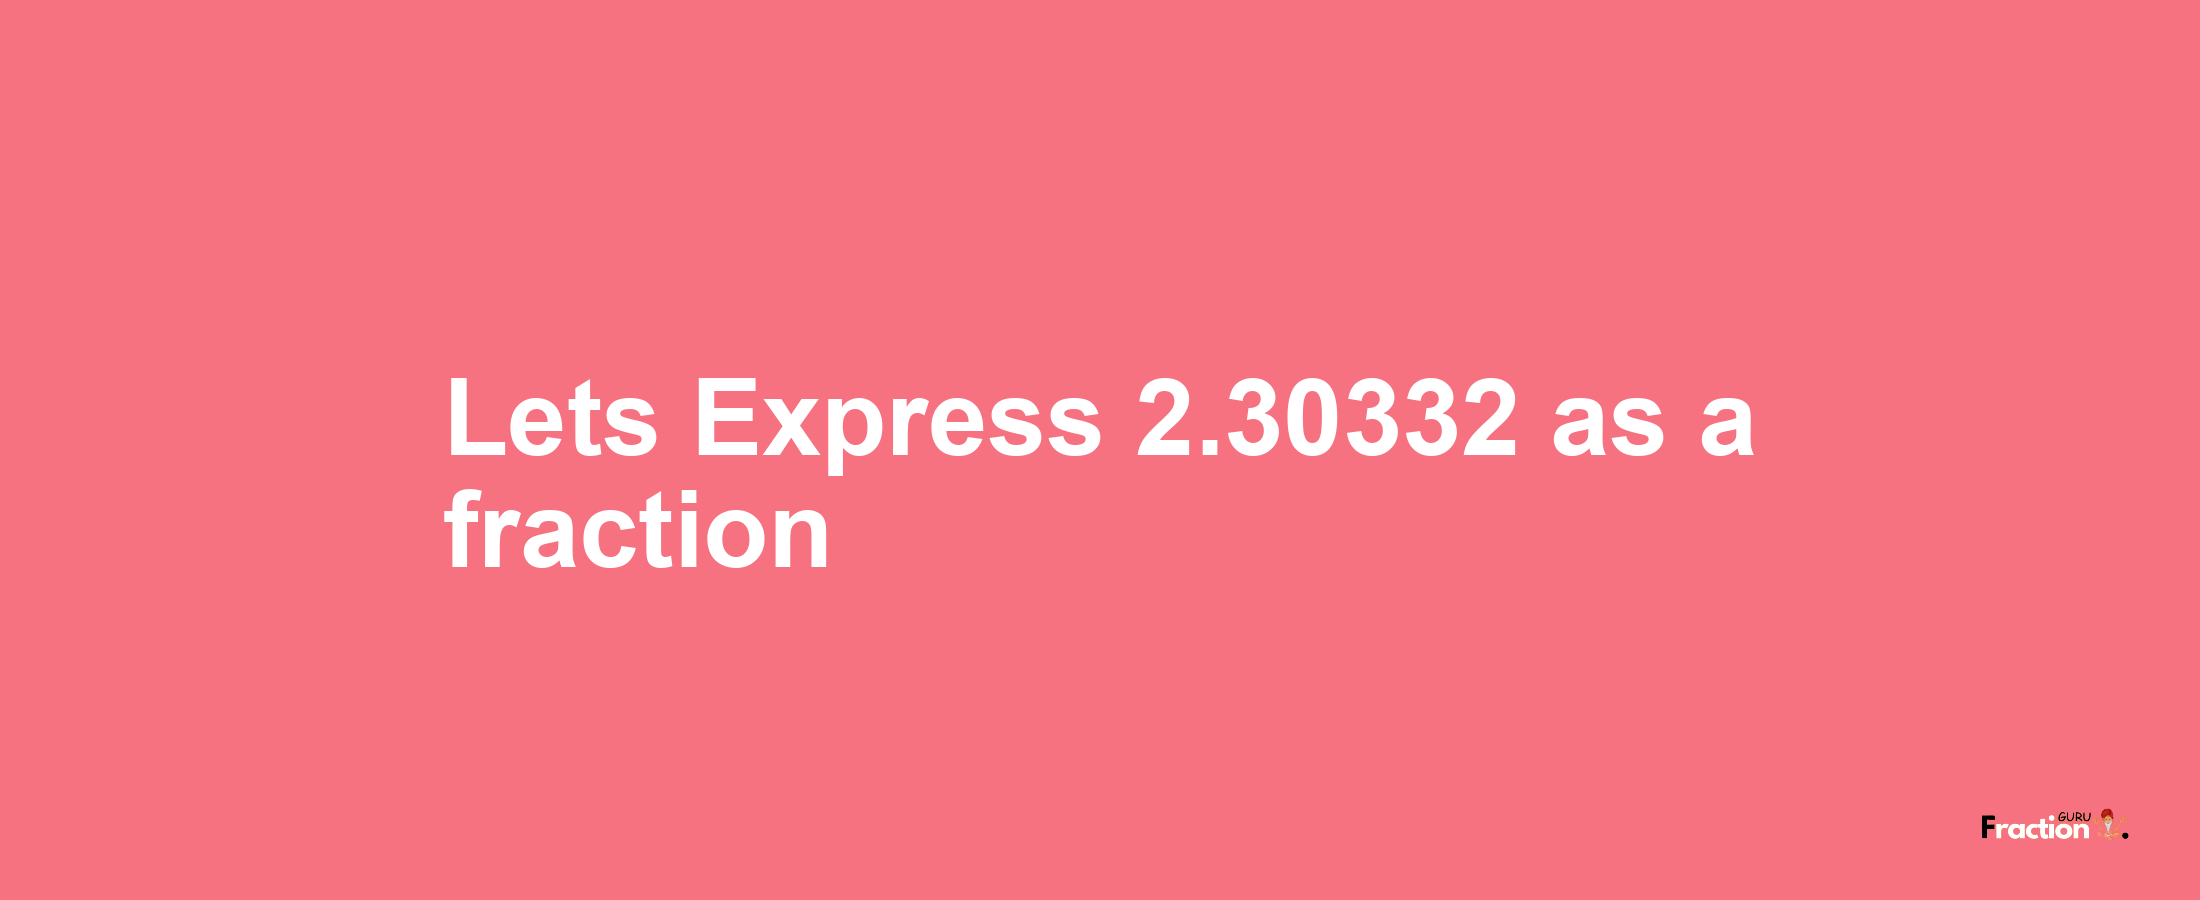 Lets Express 2.30332 as afraction